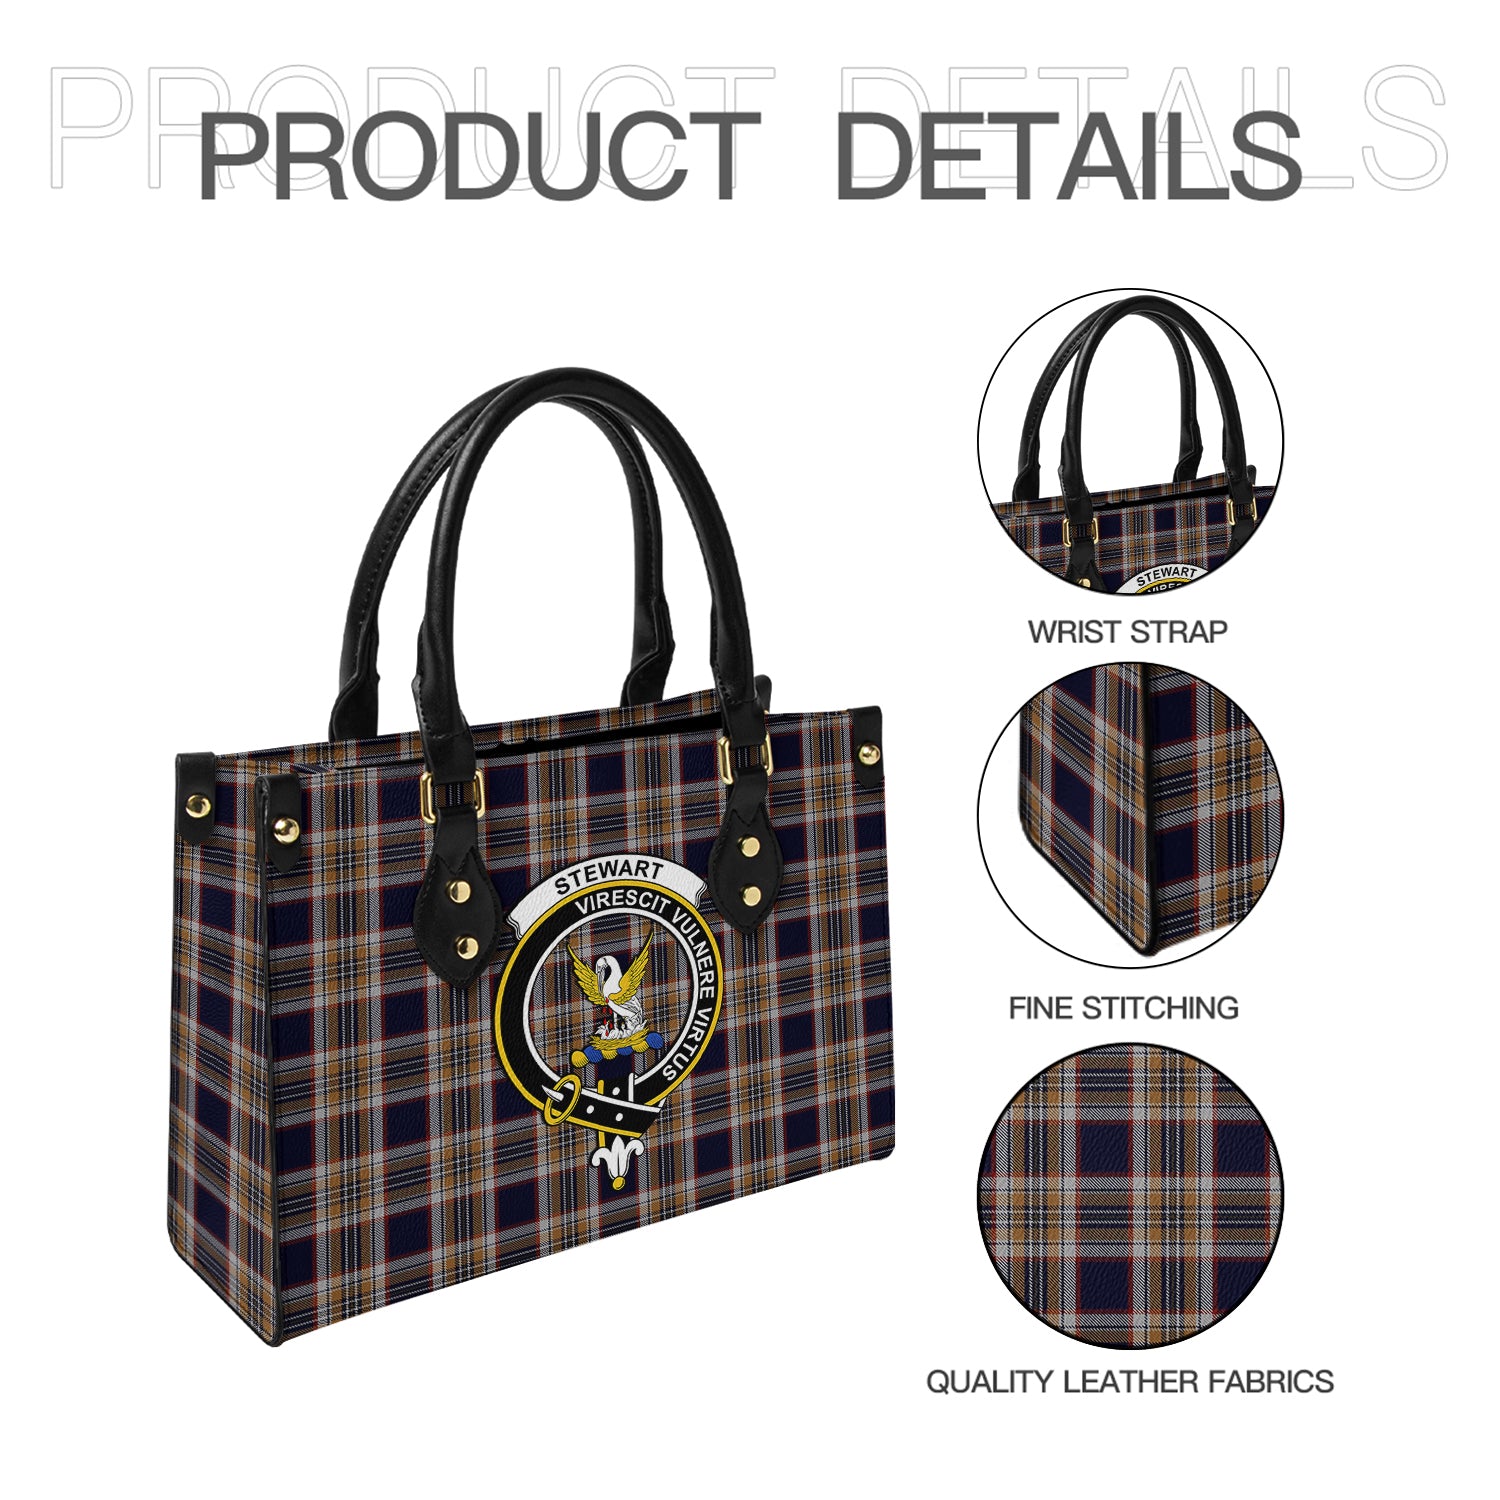 stewart-navy-tartan-leather-bag-with-family-crest